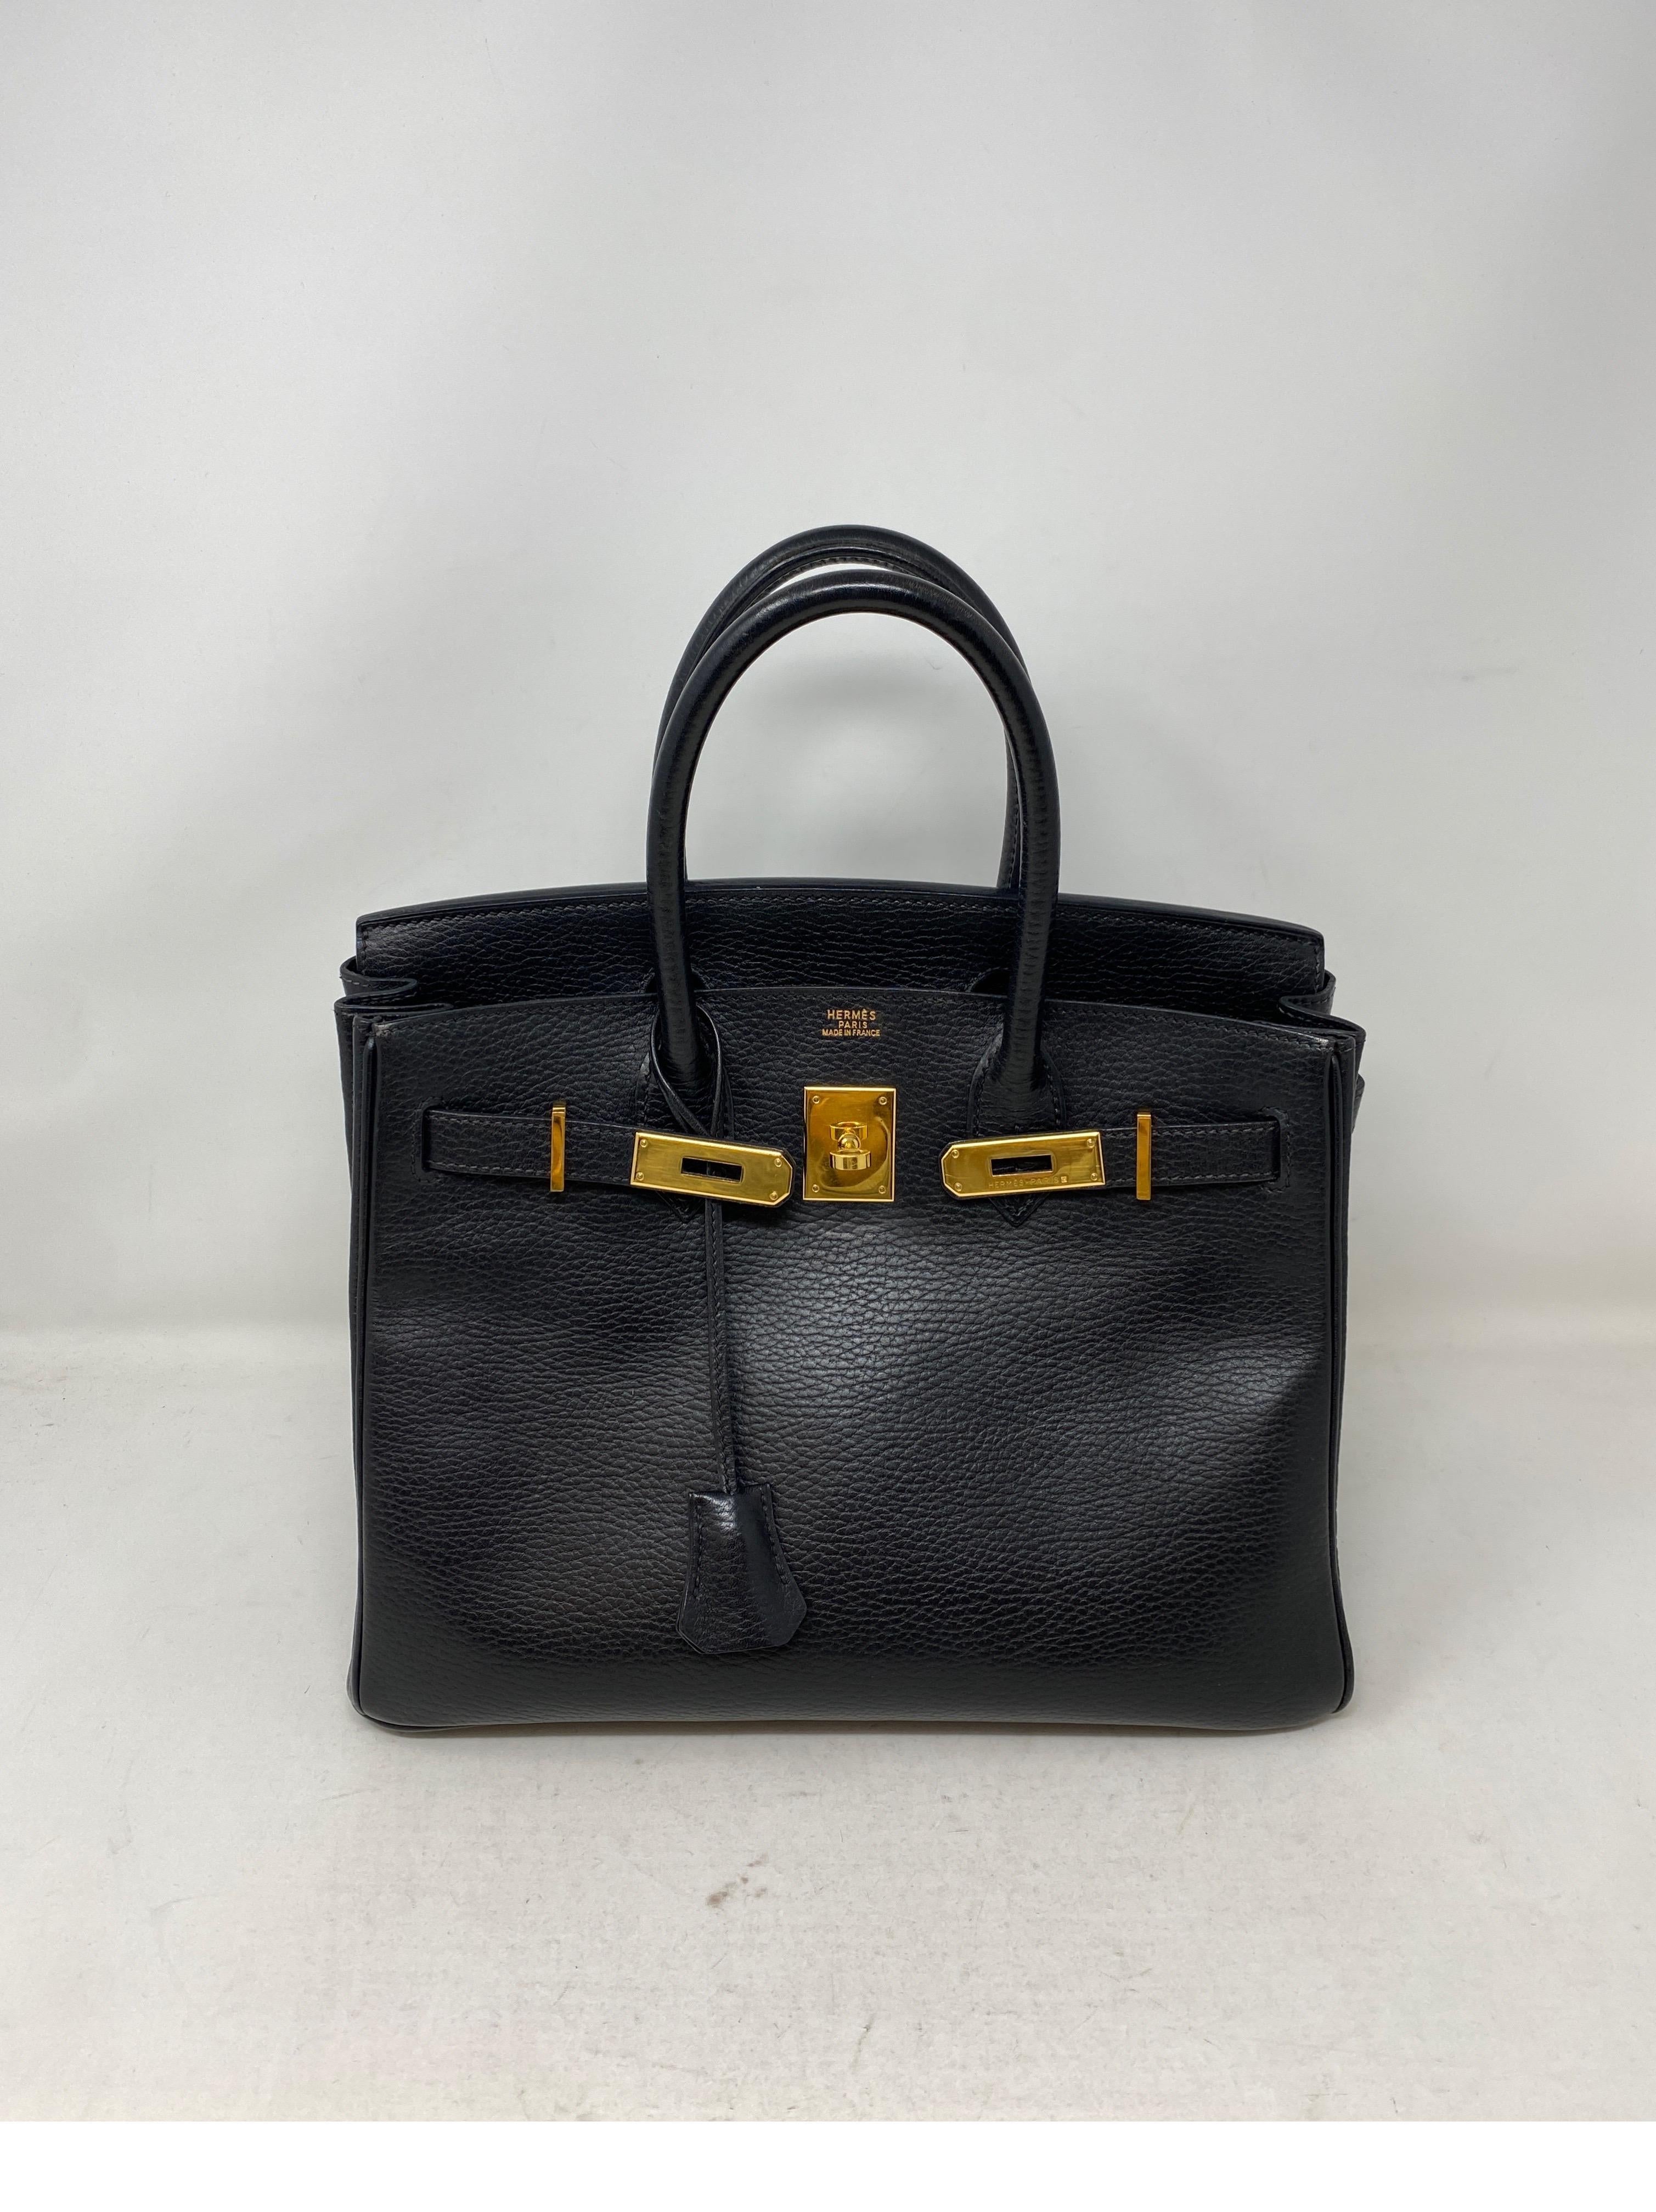 Hermes Black Birkin 30 Bag. Gold hardware. Togo leather. Highly coveted size 30 and most wanted combination. Classic bag. Includes clochette, lock, keys, and dust cover. Guaranteed authentic. 